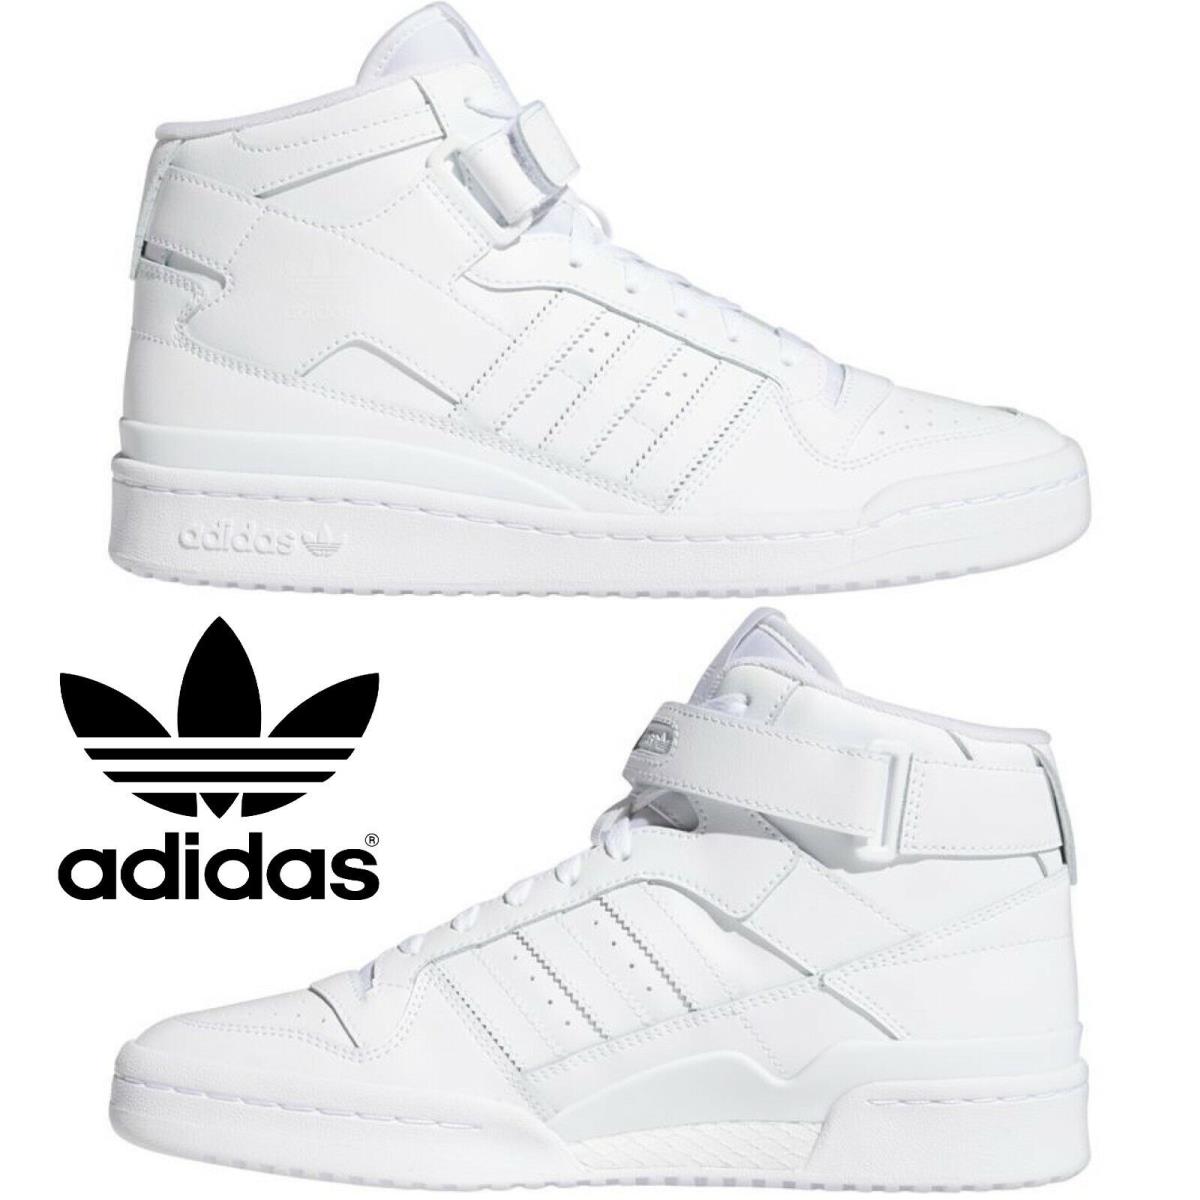 Adidas Originals Forum Mid Men`s Sneakers Comfort Casual Shoes High Top White - White , White/White/White Manufacturer